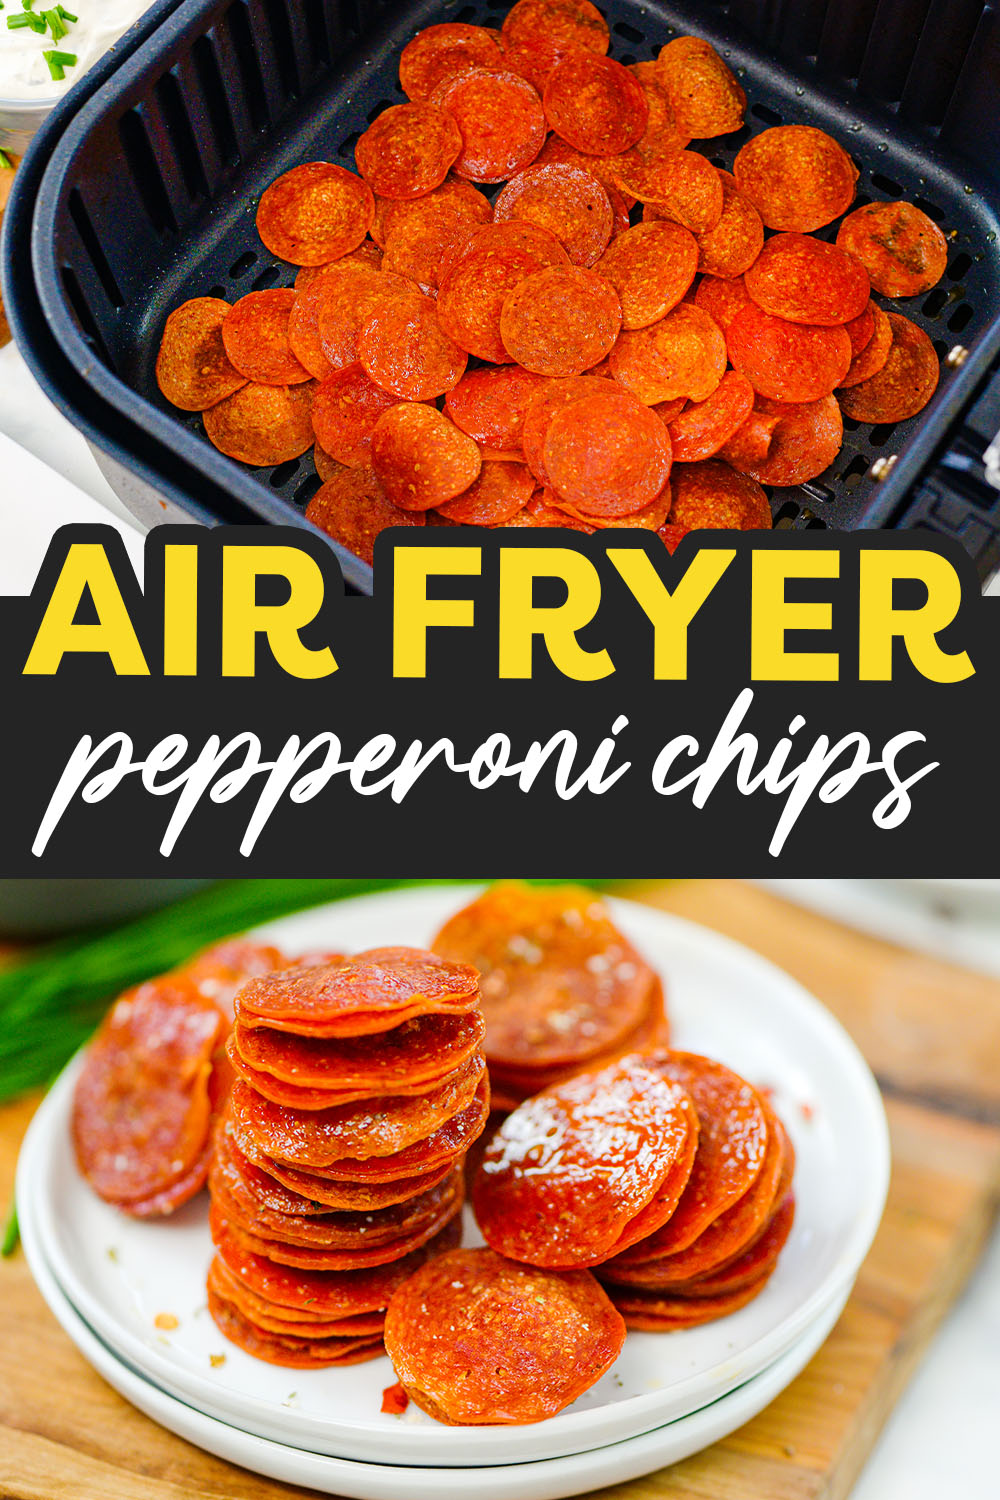 Crisp pepperoni chips are full of flavor!  And making air fryer pepperoni chips hangs onto all the flavor with ease!